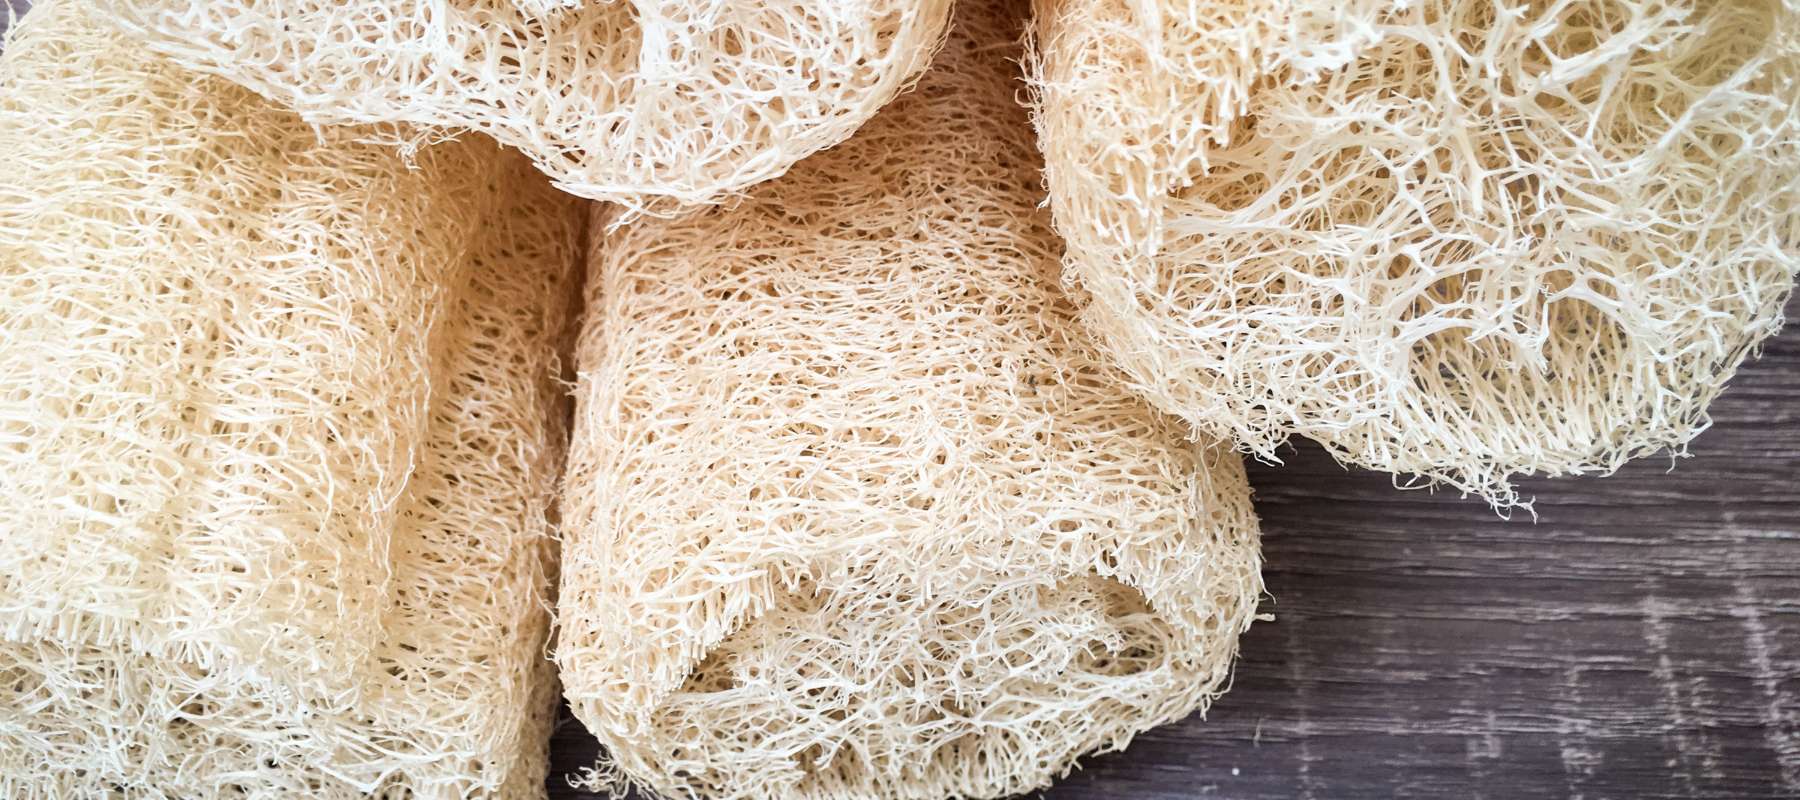 How to Process Your Luffa Gourd to Make a Sponge